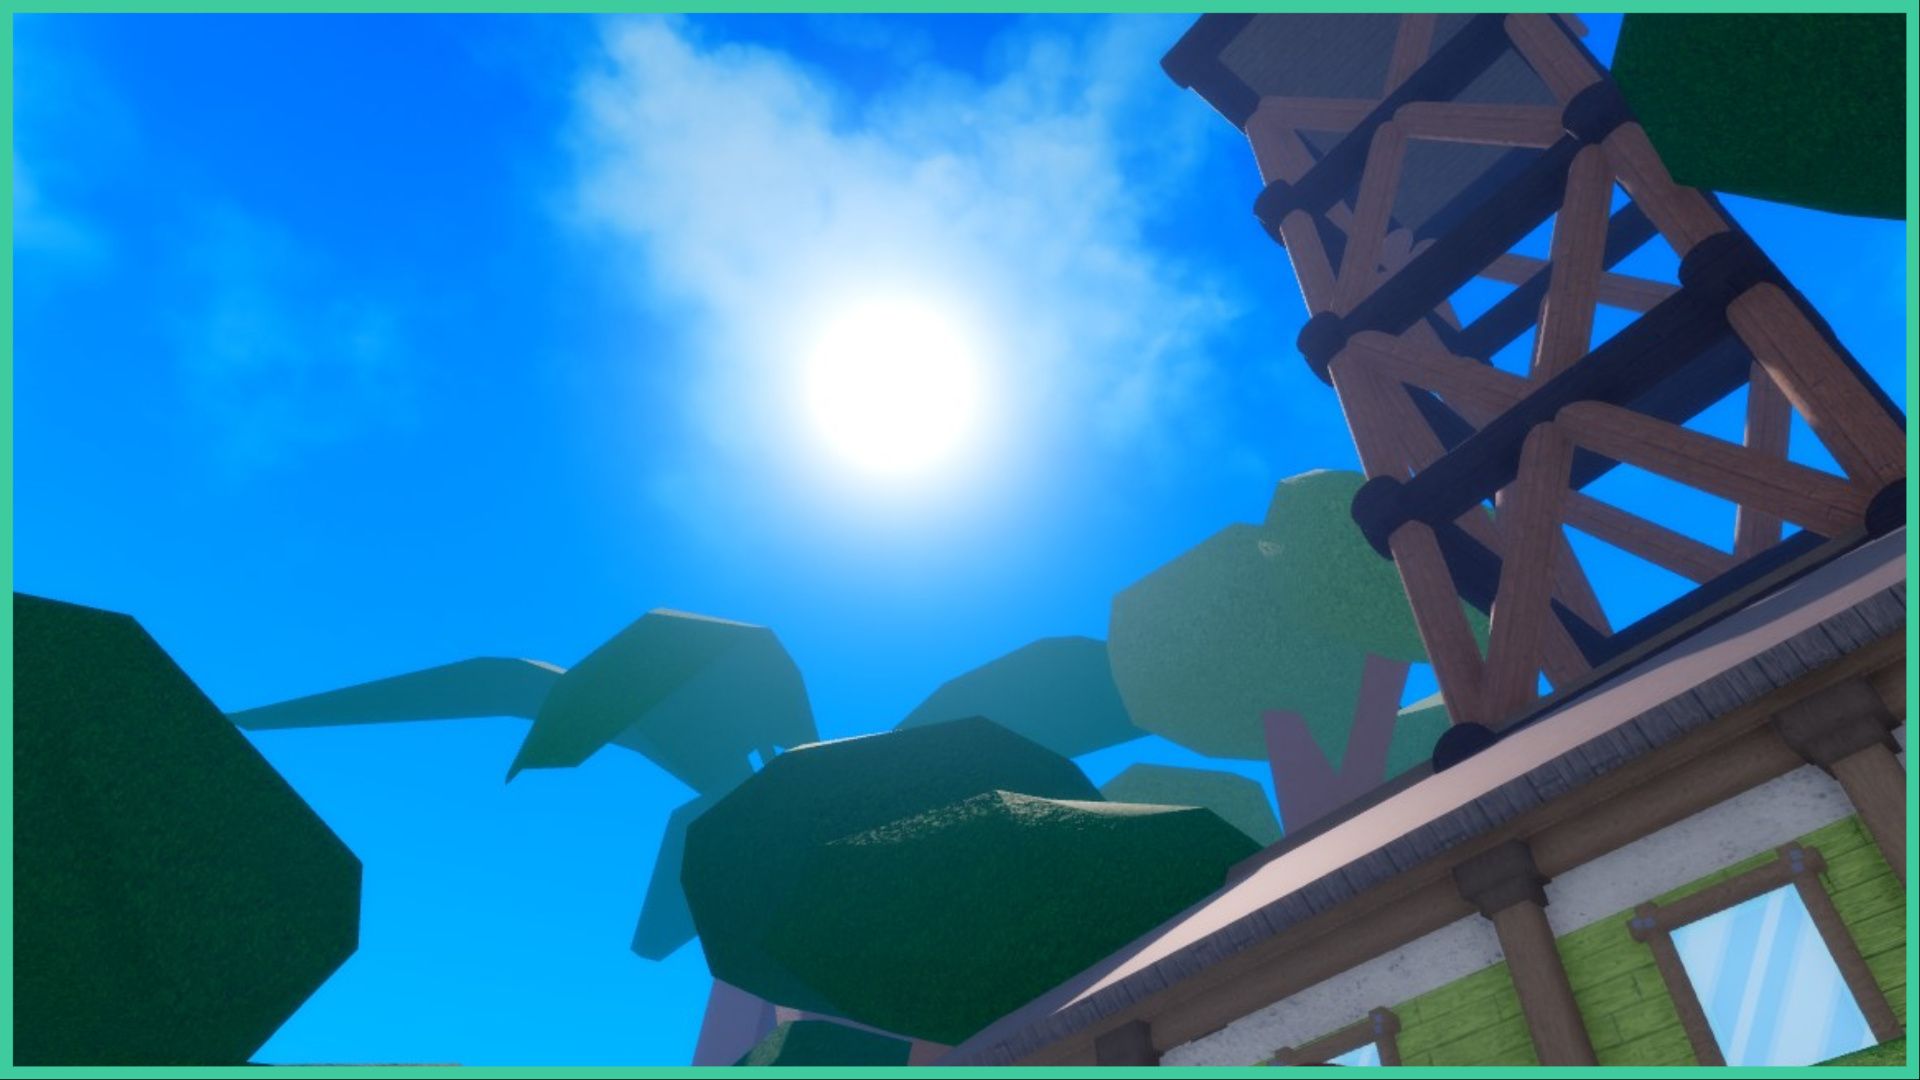 feature image for our legacy piece bosses guide, it shows the sky and the sun glowing in the middle as the player looks up, with minimal clouds in the blue sky, a wooden tower attached to a house, and a giant palm tree close by, as well as some bushy trees